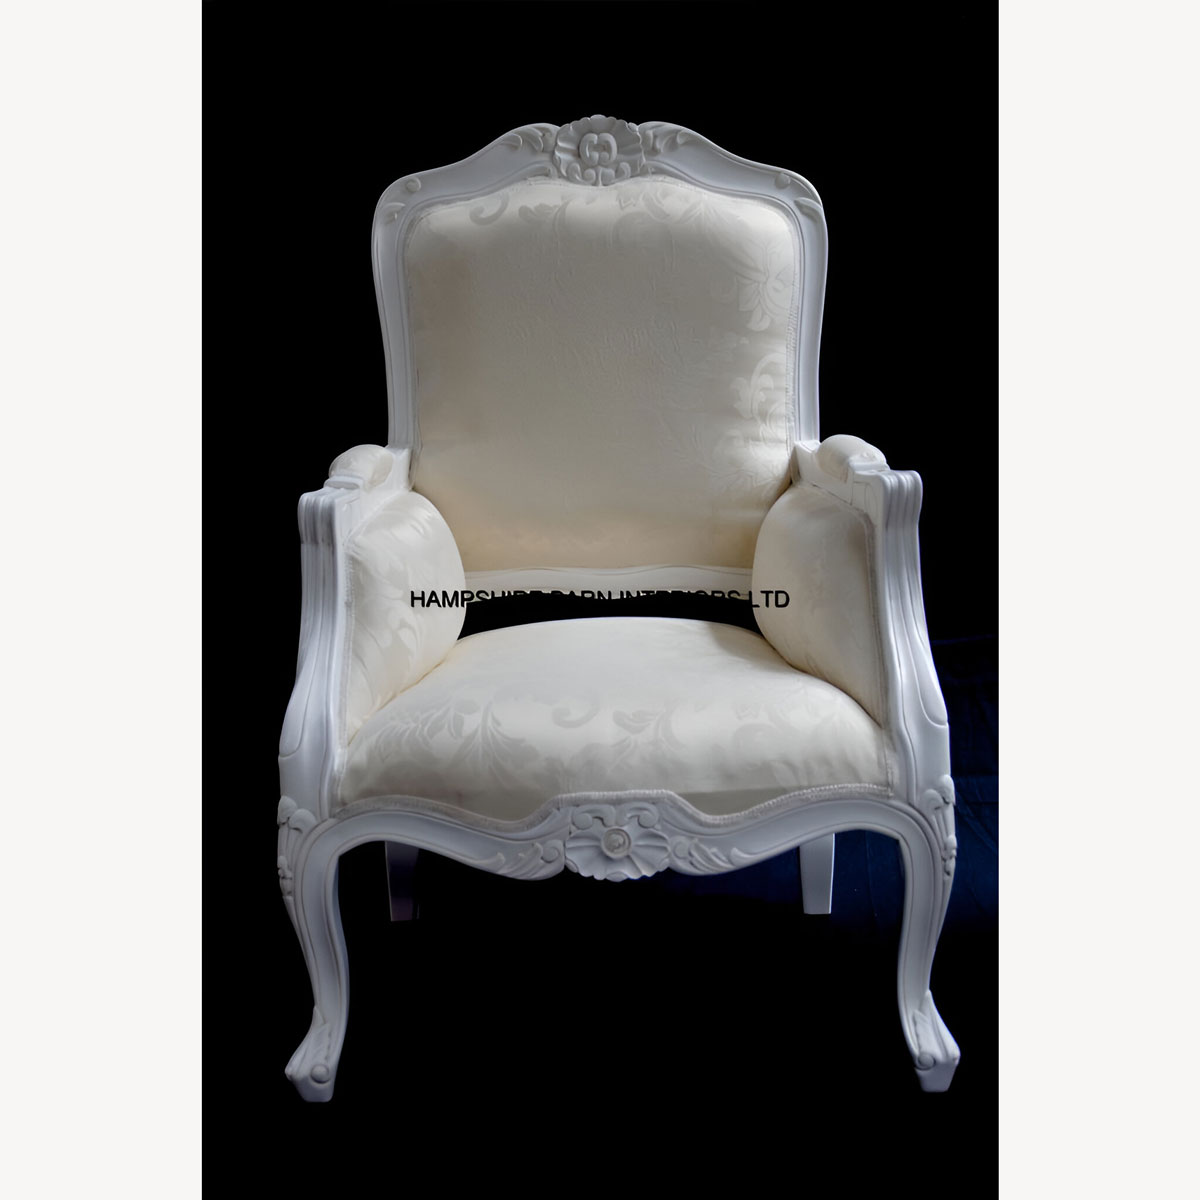 French Chateau Style Ornate Arm Chair Bedroom Antique White Boudoir Shop Lounge 1 - Hampshire Barn Interiors - French Chateau Style Ornate Arm Chair Bedroom Antique White Boudoir Shop Lounge -